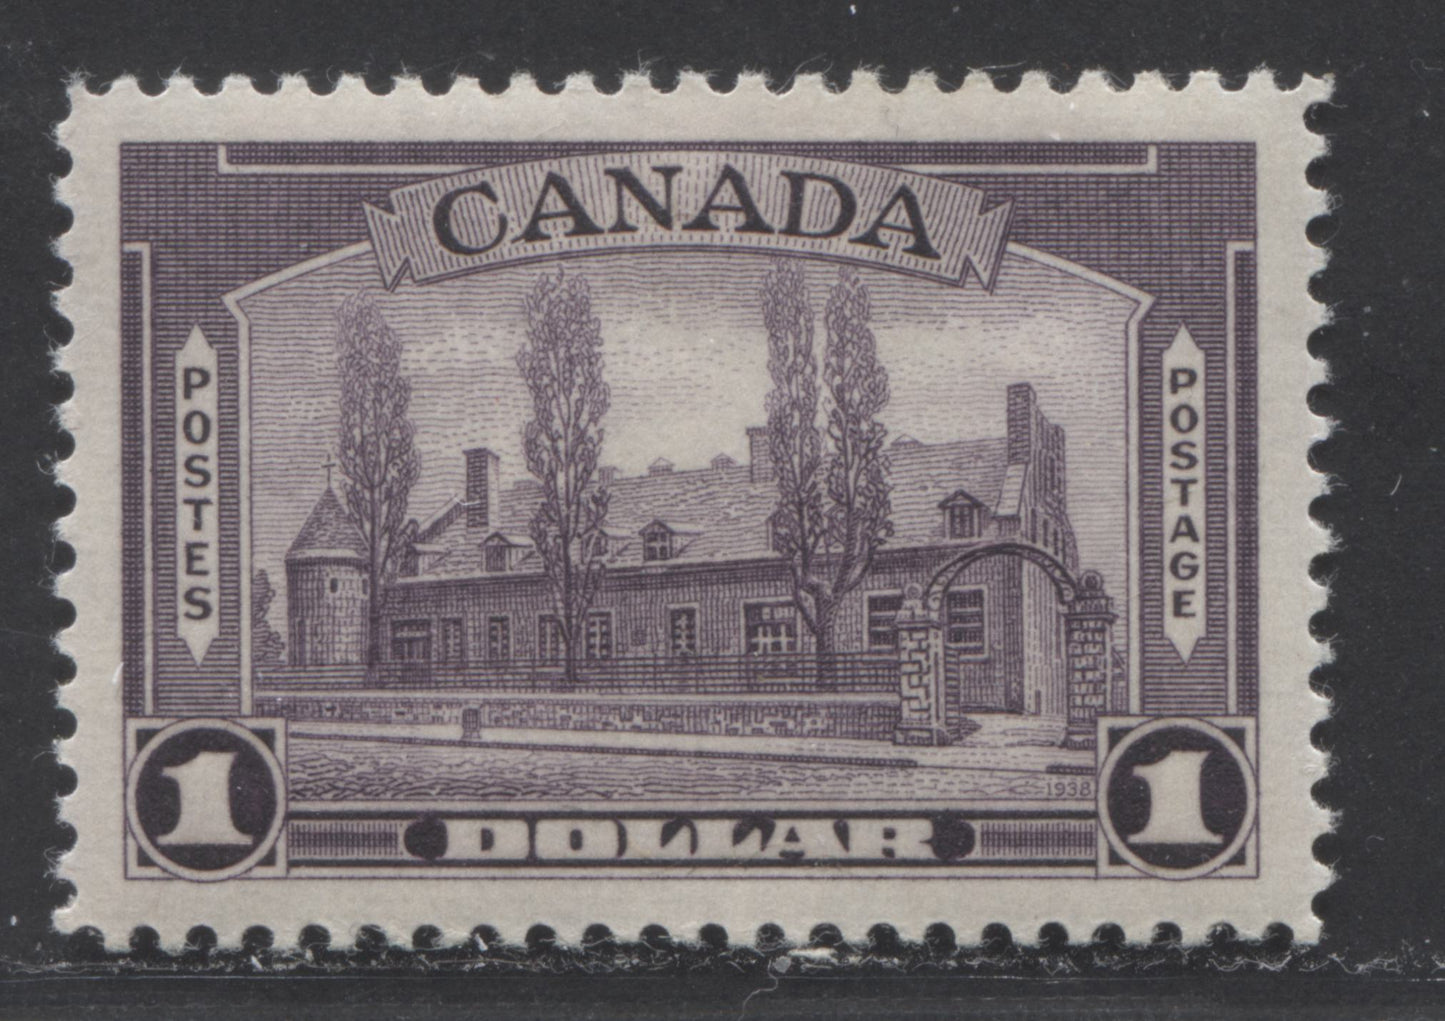 Lot 68 Canada #245 $1 Dull Reddish Violet, 1938 Pictorial Issue, A VFOG Single On Horizontal Ribbed Paper With Yellowish Satin Gum, 2 Lines At UR, Unlisted Arc Between NA Of 'Canada'